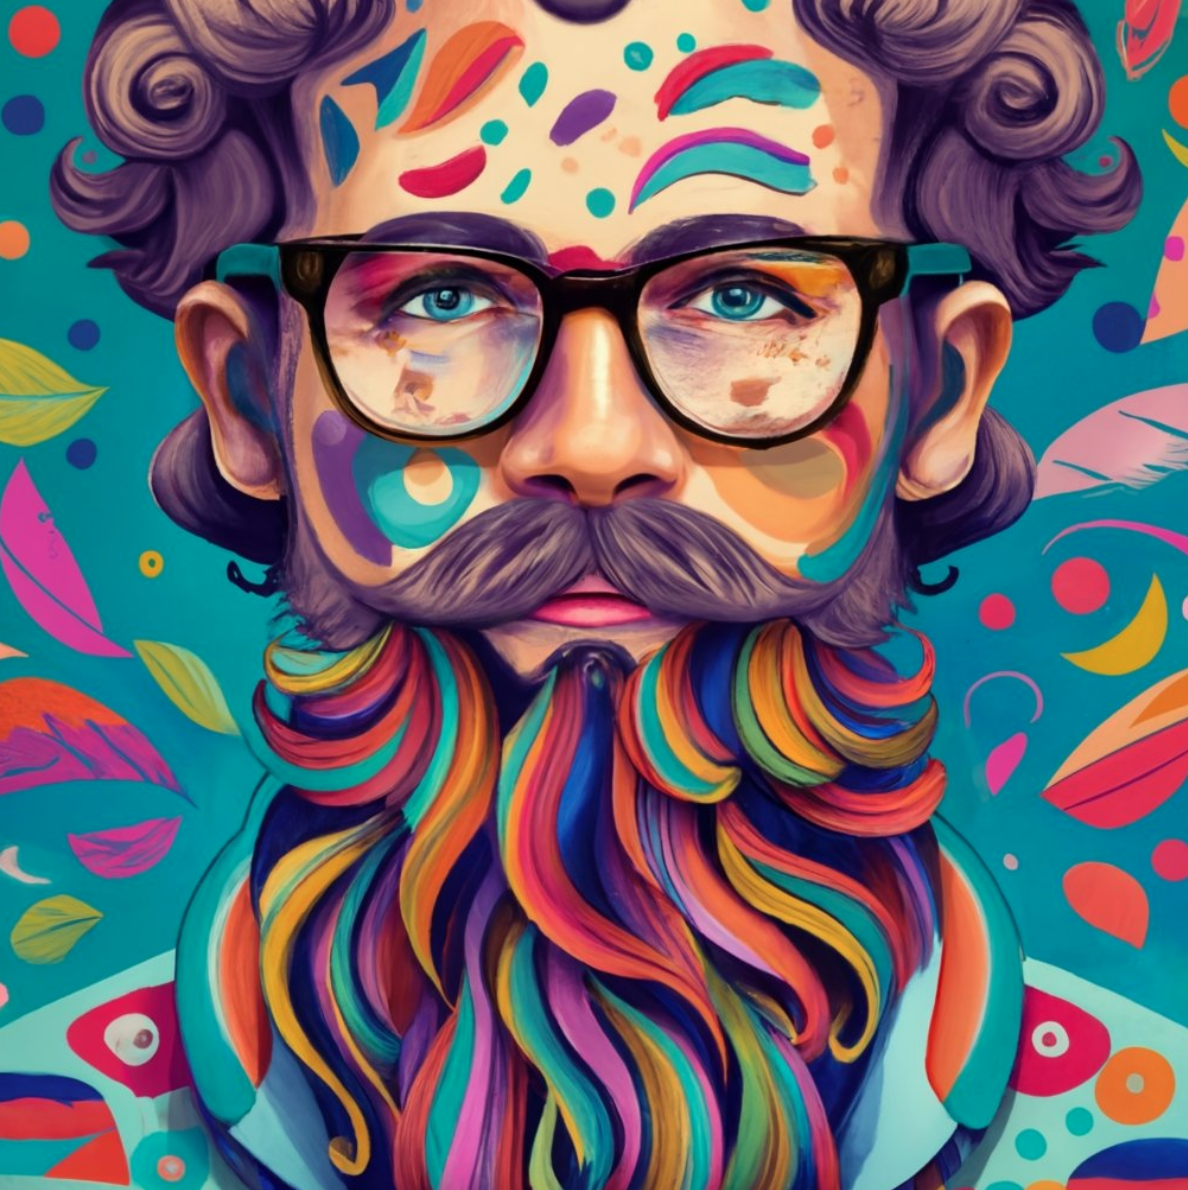 screenshot of cool artwork showing a man covered in paint. He has a hipster beard and glasses